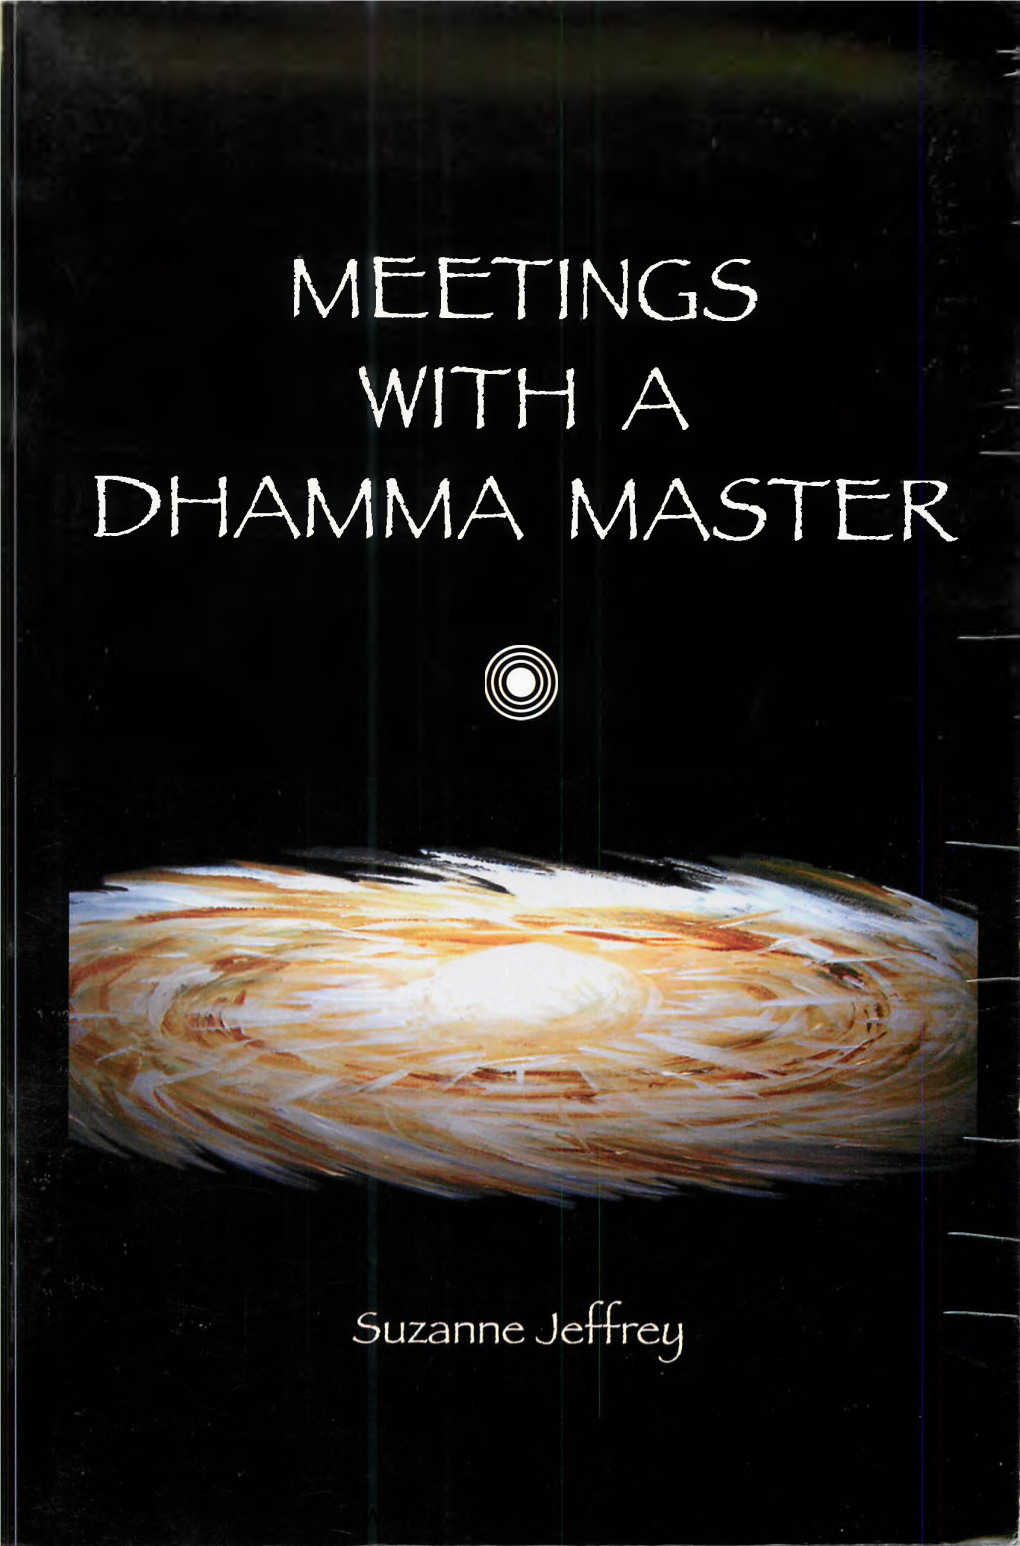 Meetings with a Dhamma Master Copyright © 2011 by Suzanne Jeffrey